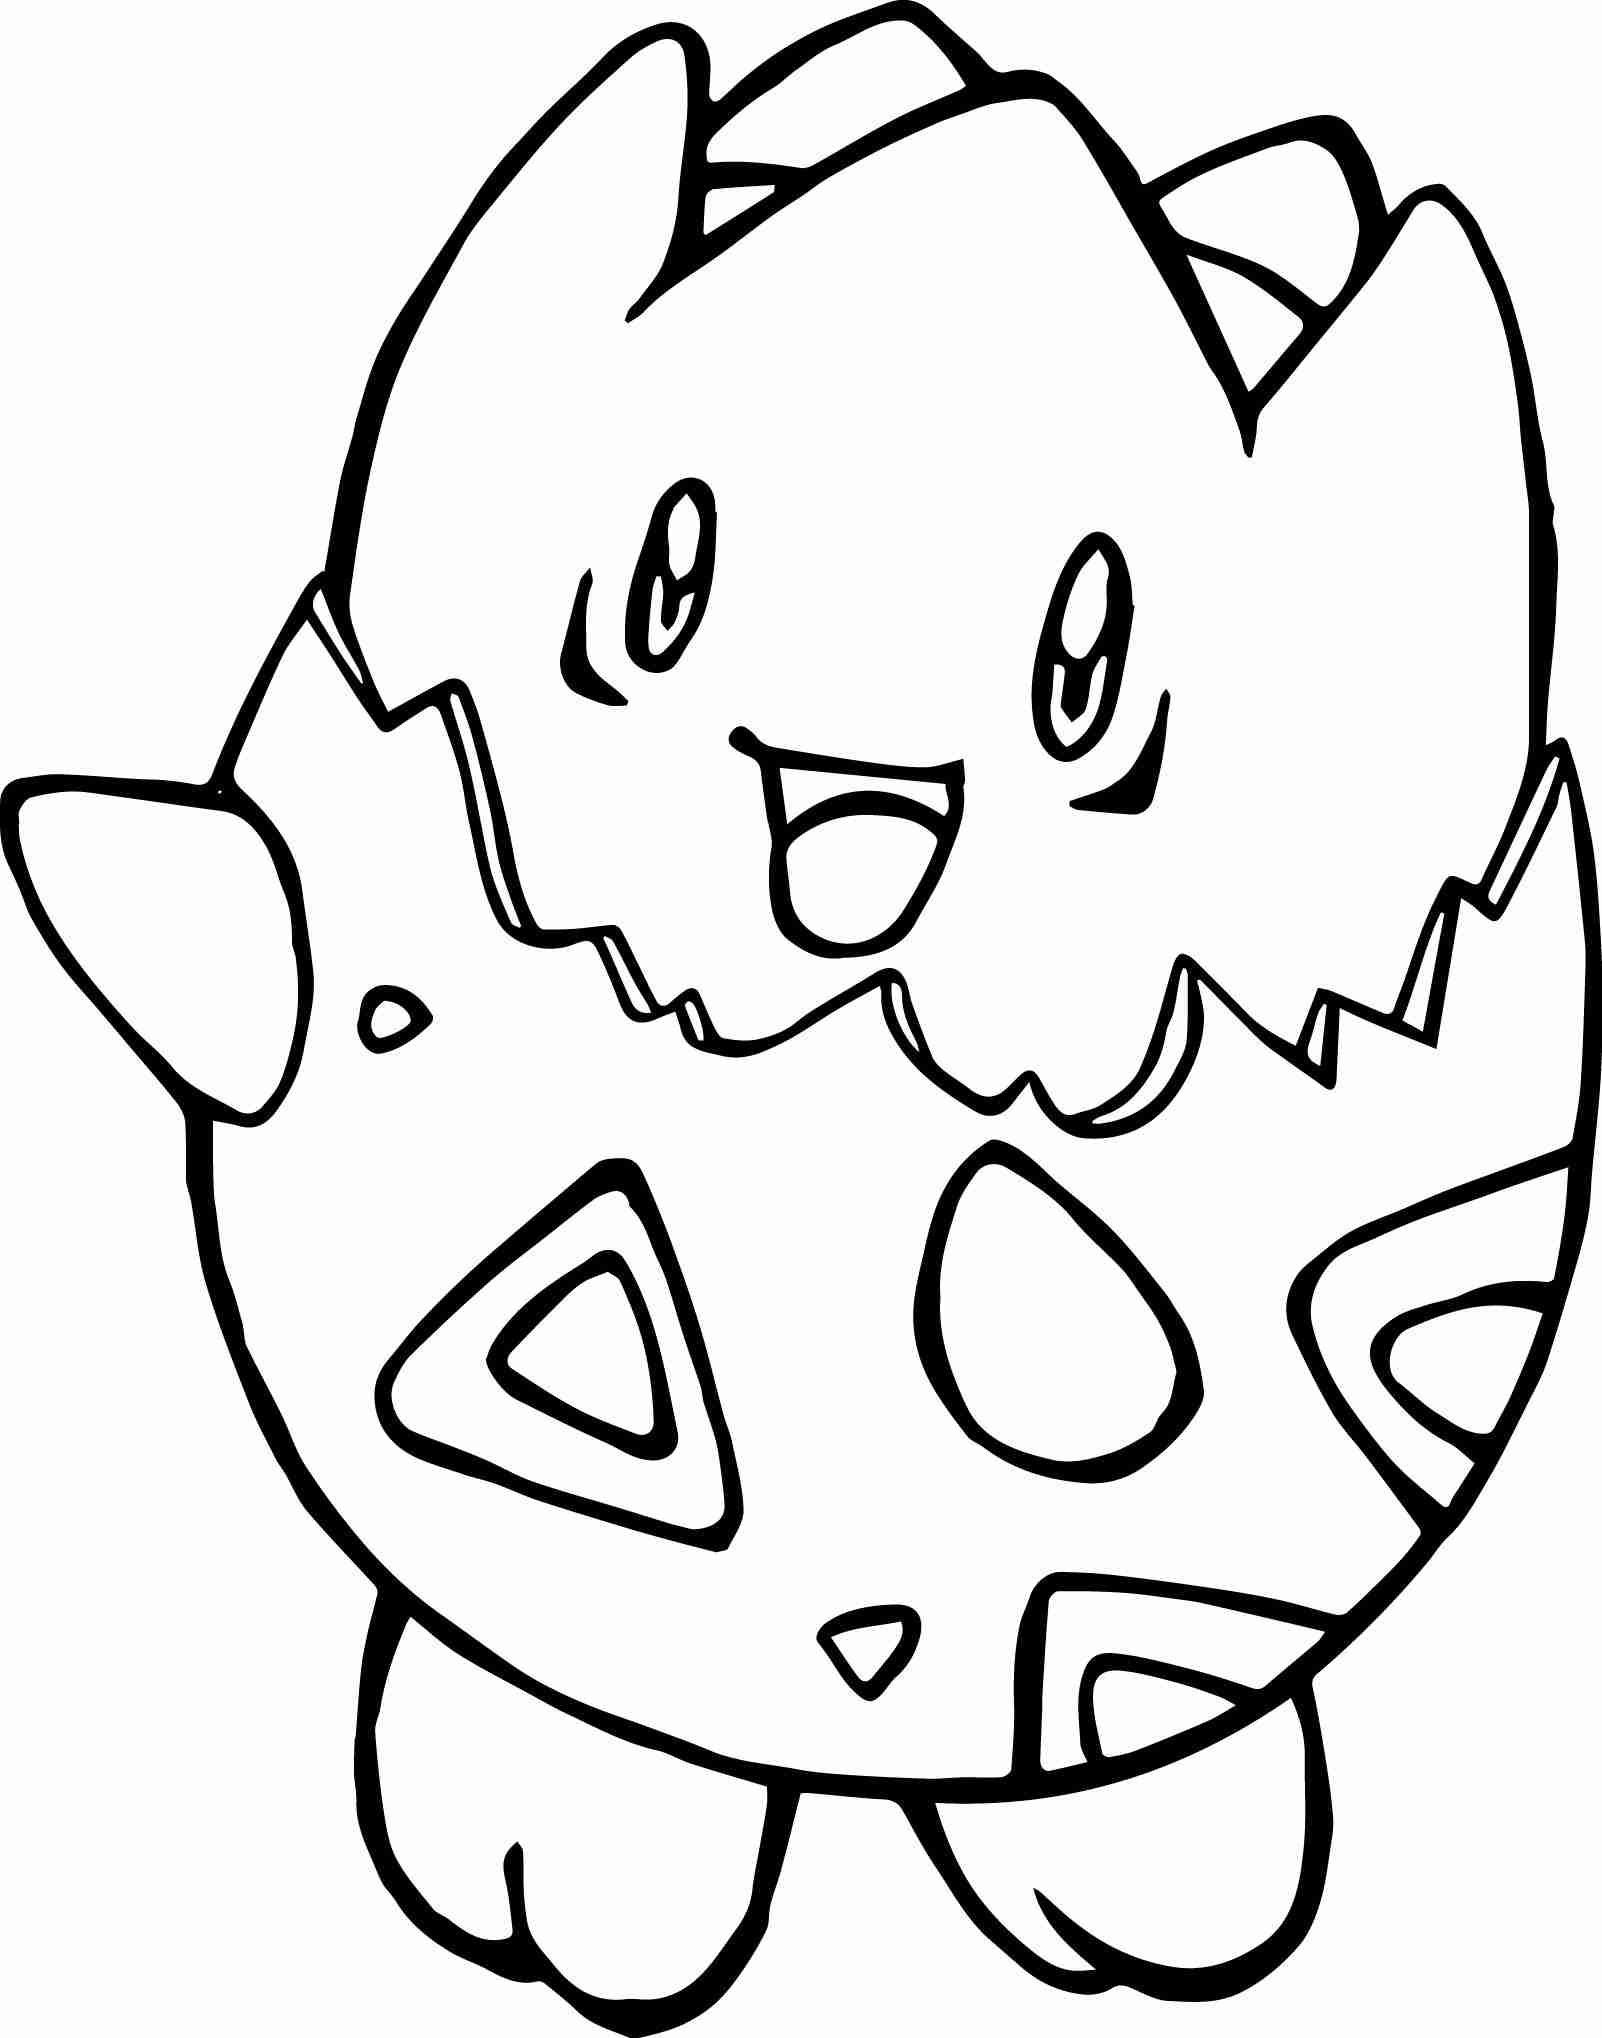 The best free Togepi coloring page images. Download from 35 free